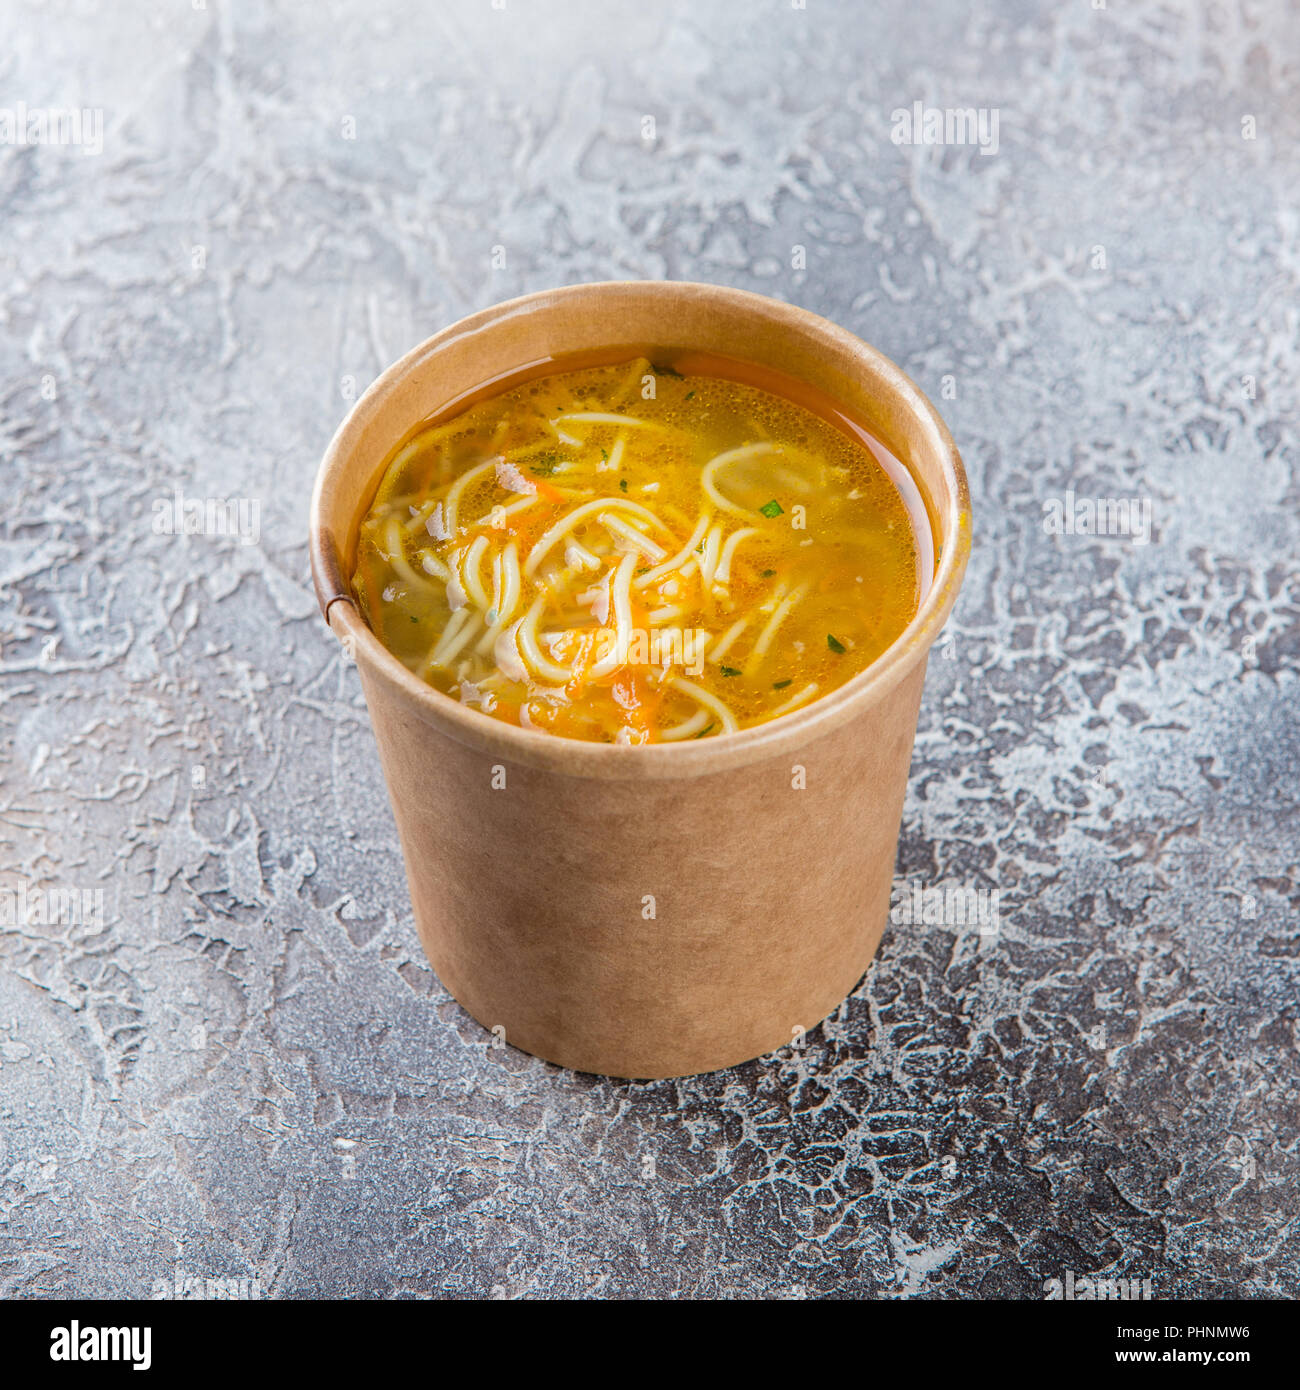 Chicken noodle soup Stock Photo